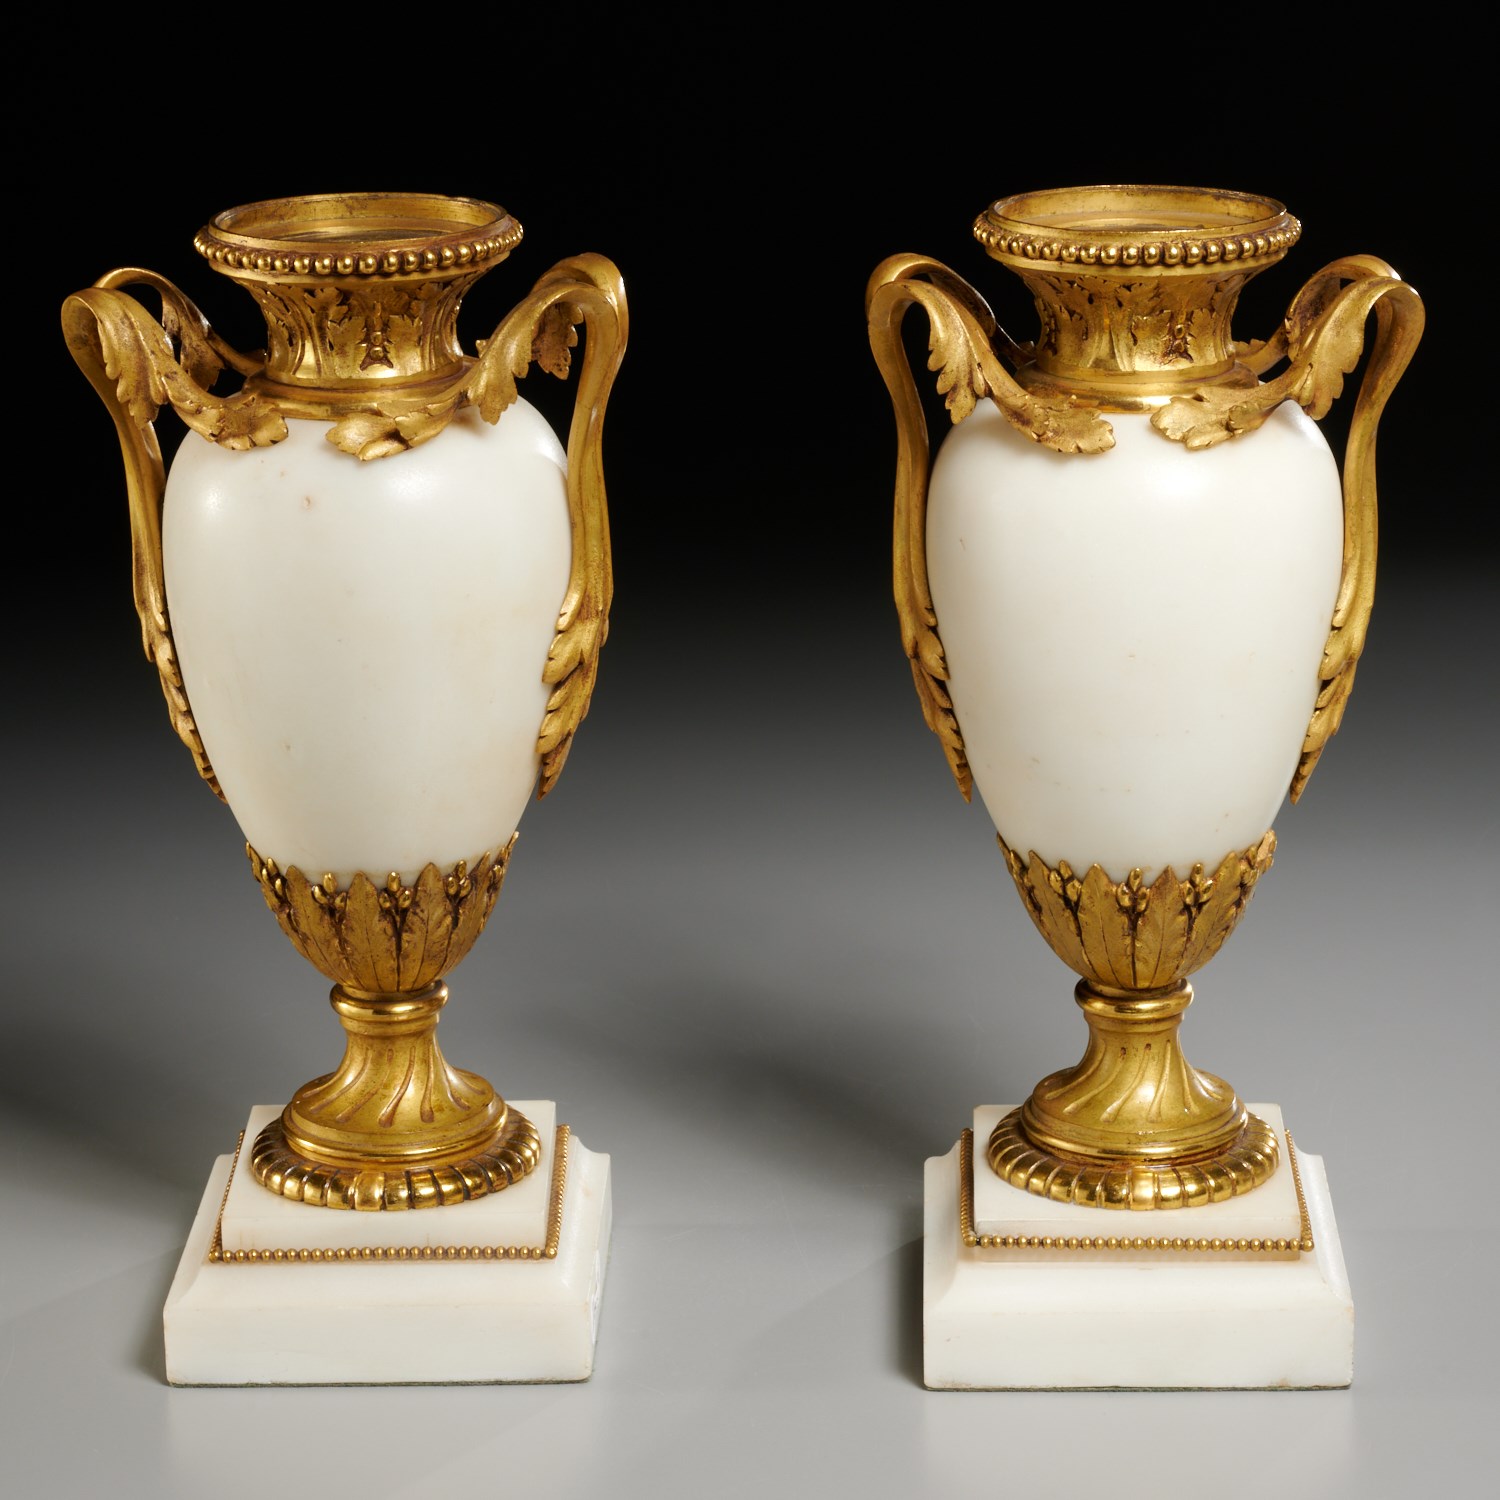 PAIR FRENCH GILT BRONZE MOUNTED